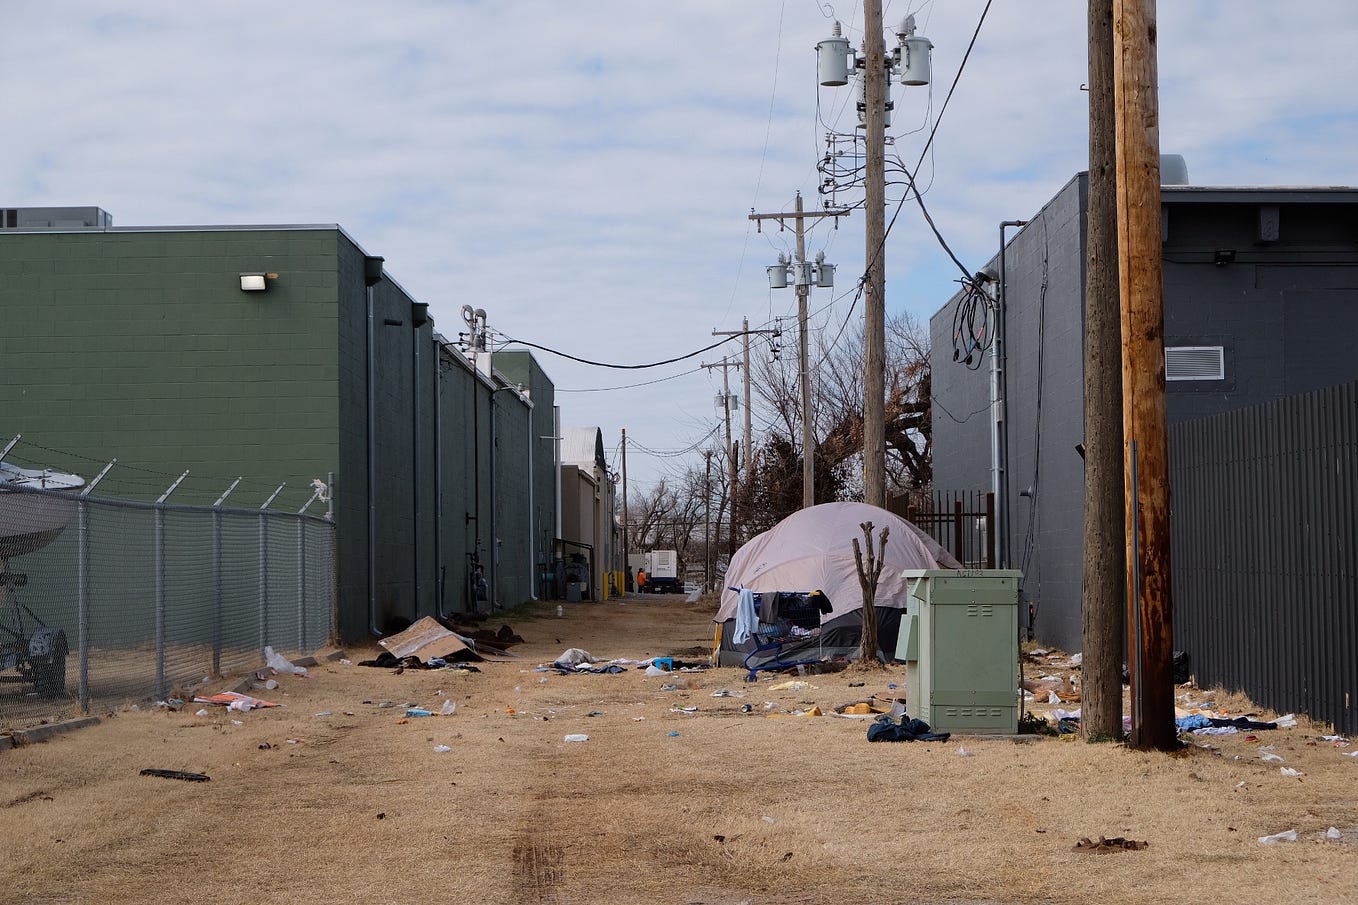 A tent and scattered belongings in an alley near the Homeless Alliance in Oklahoma City.